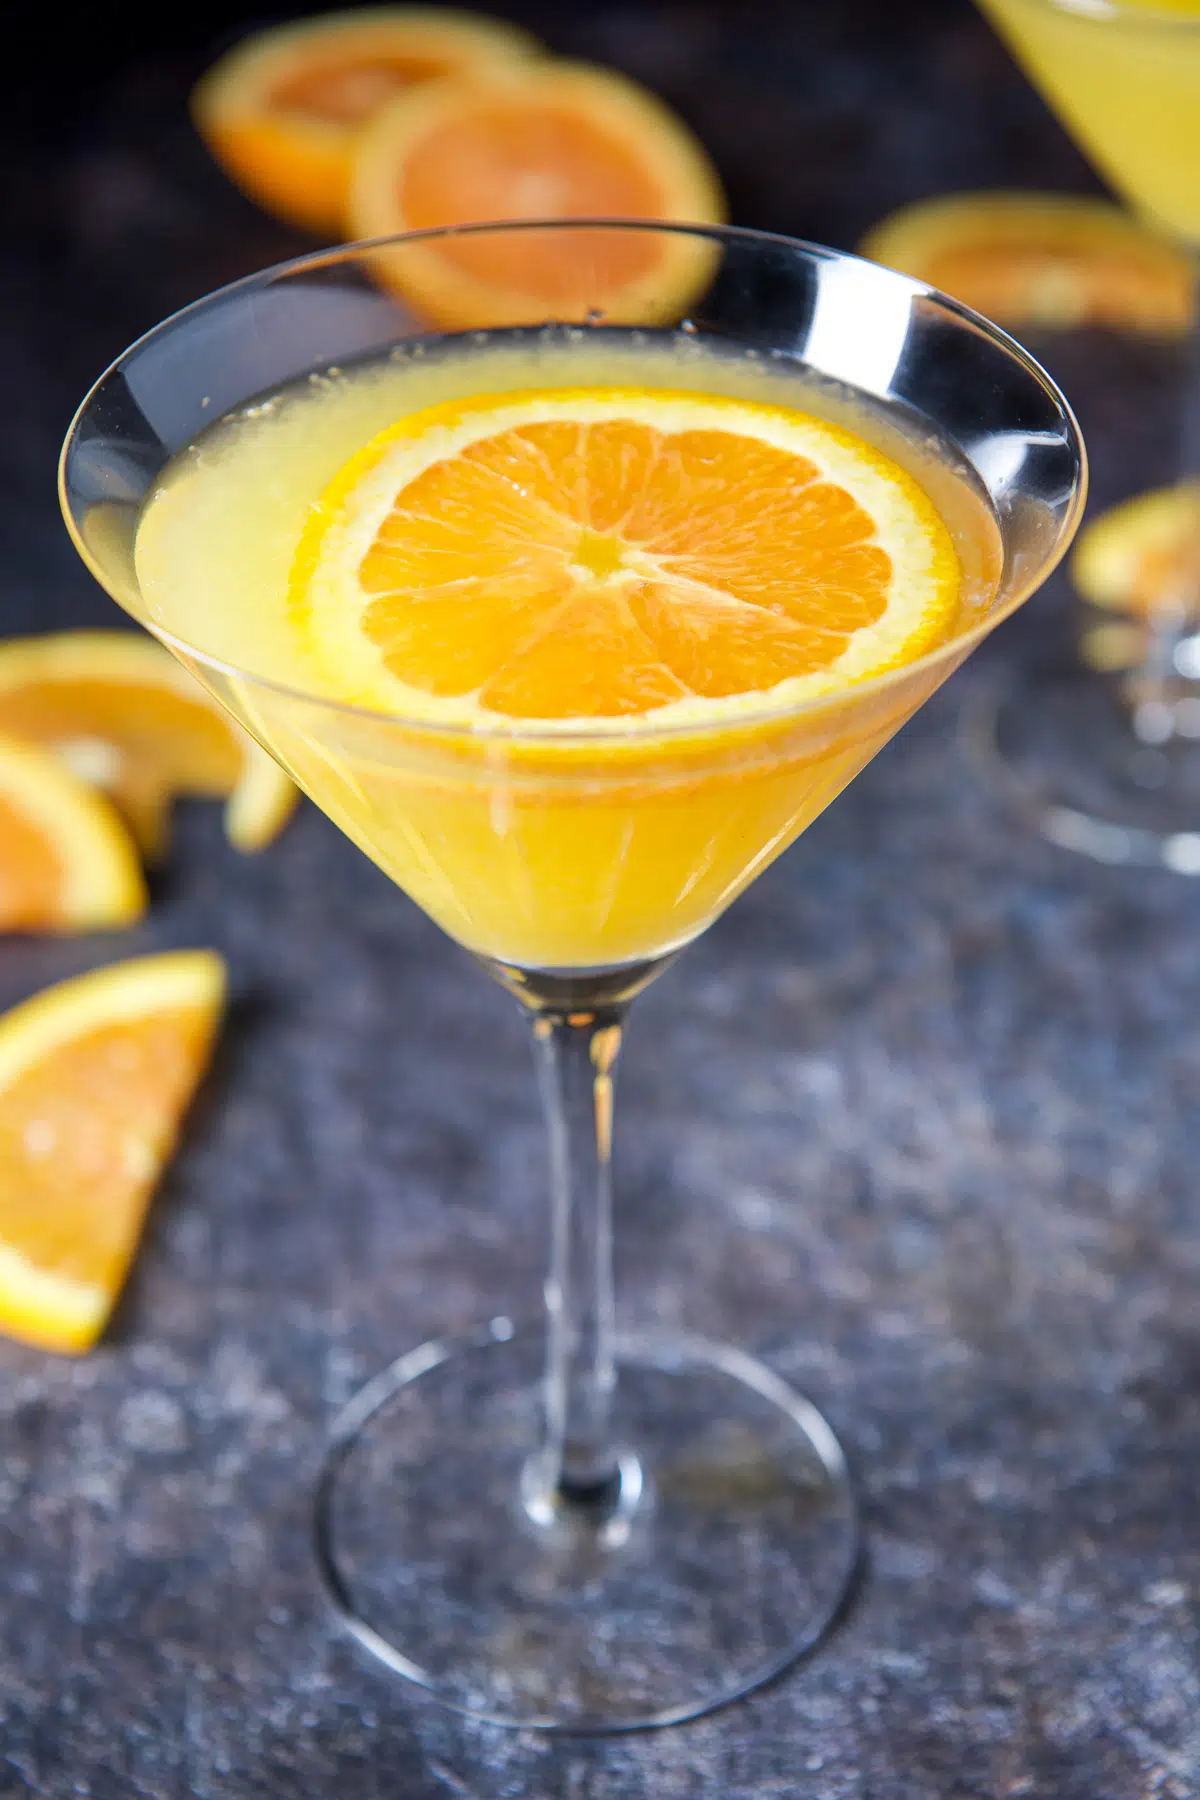 Double close up of a glass with the orange floating in the martini